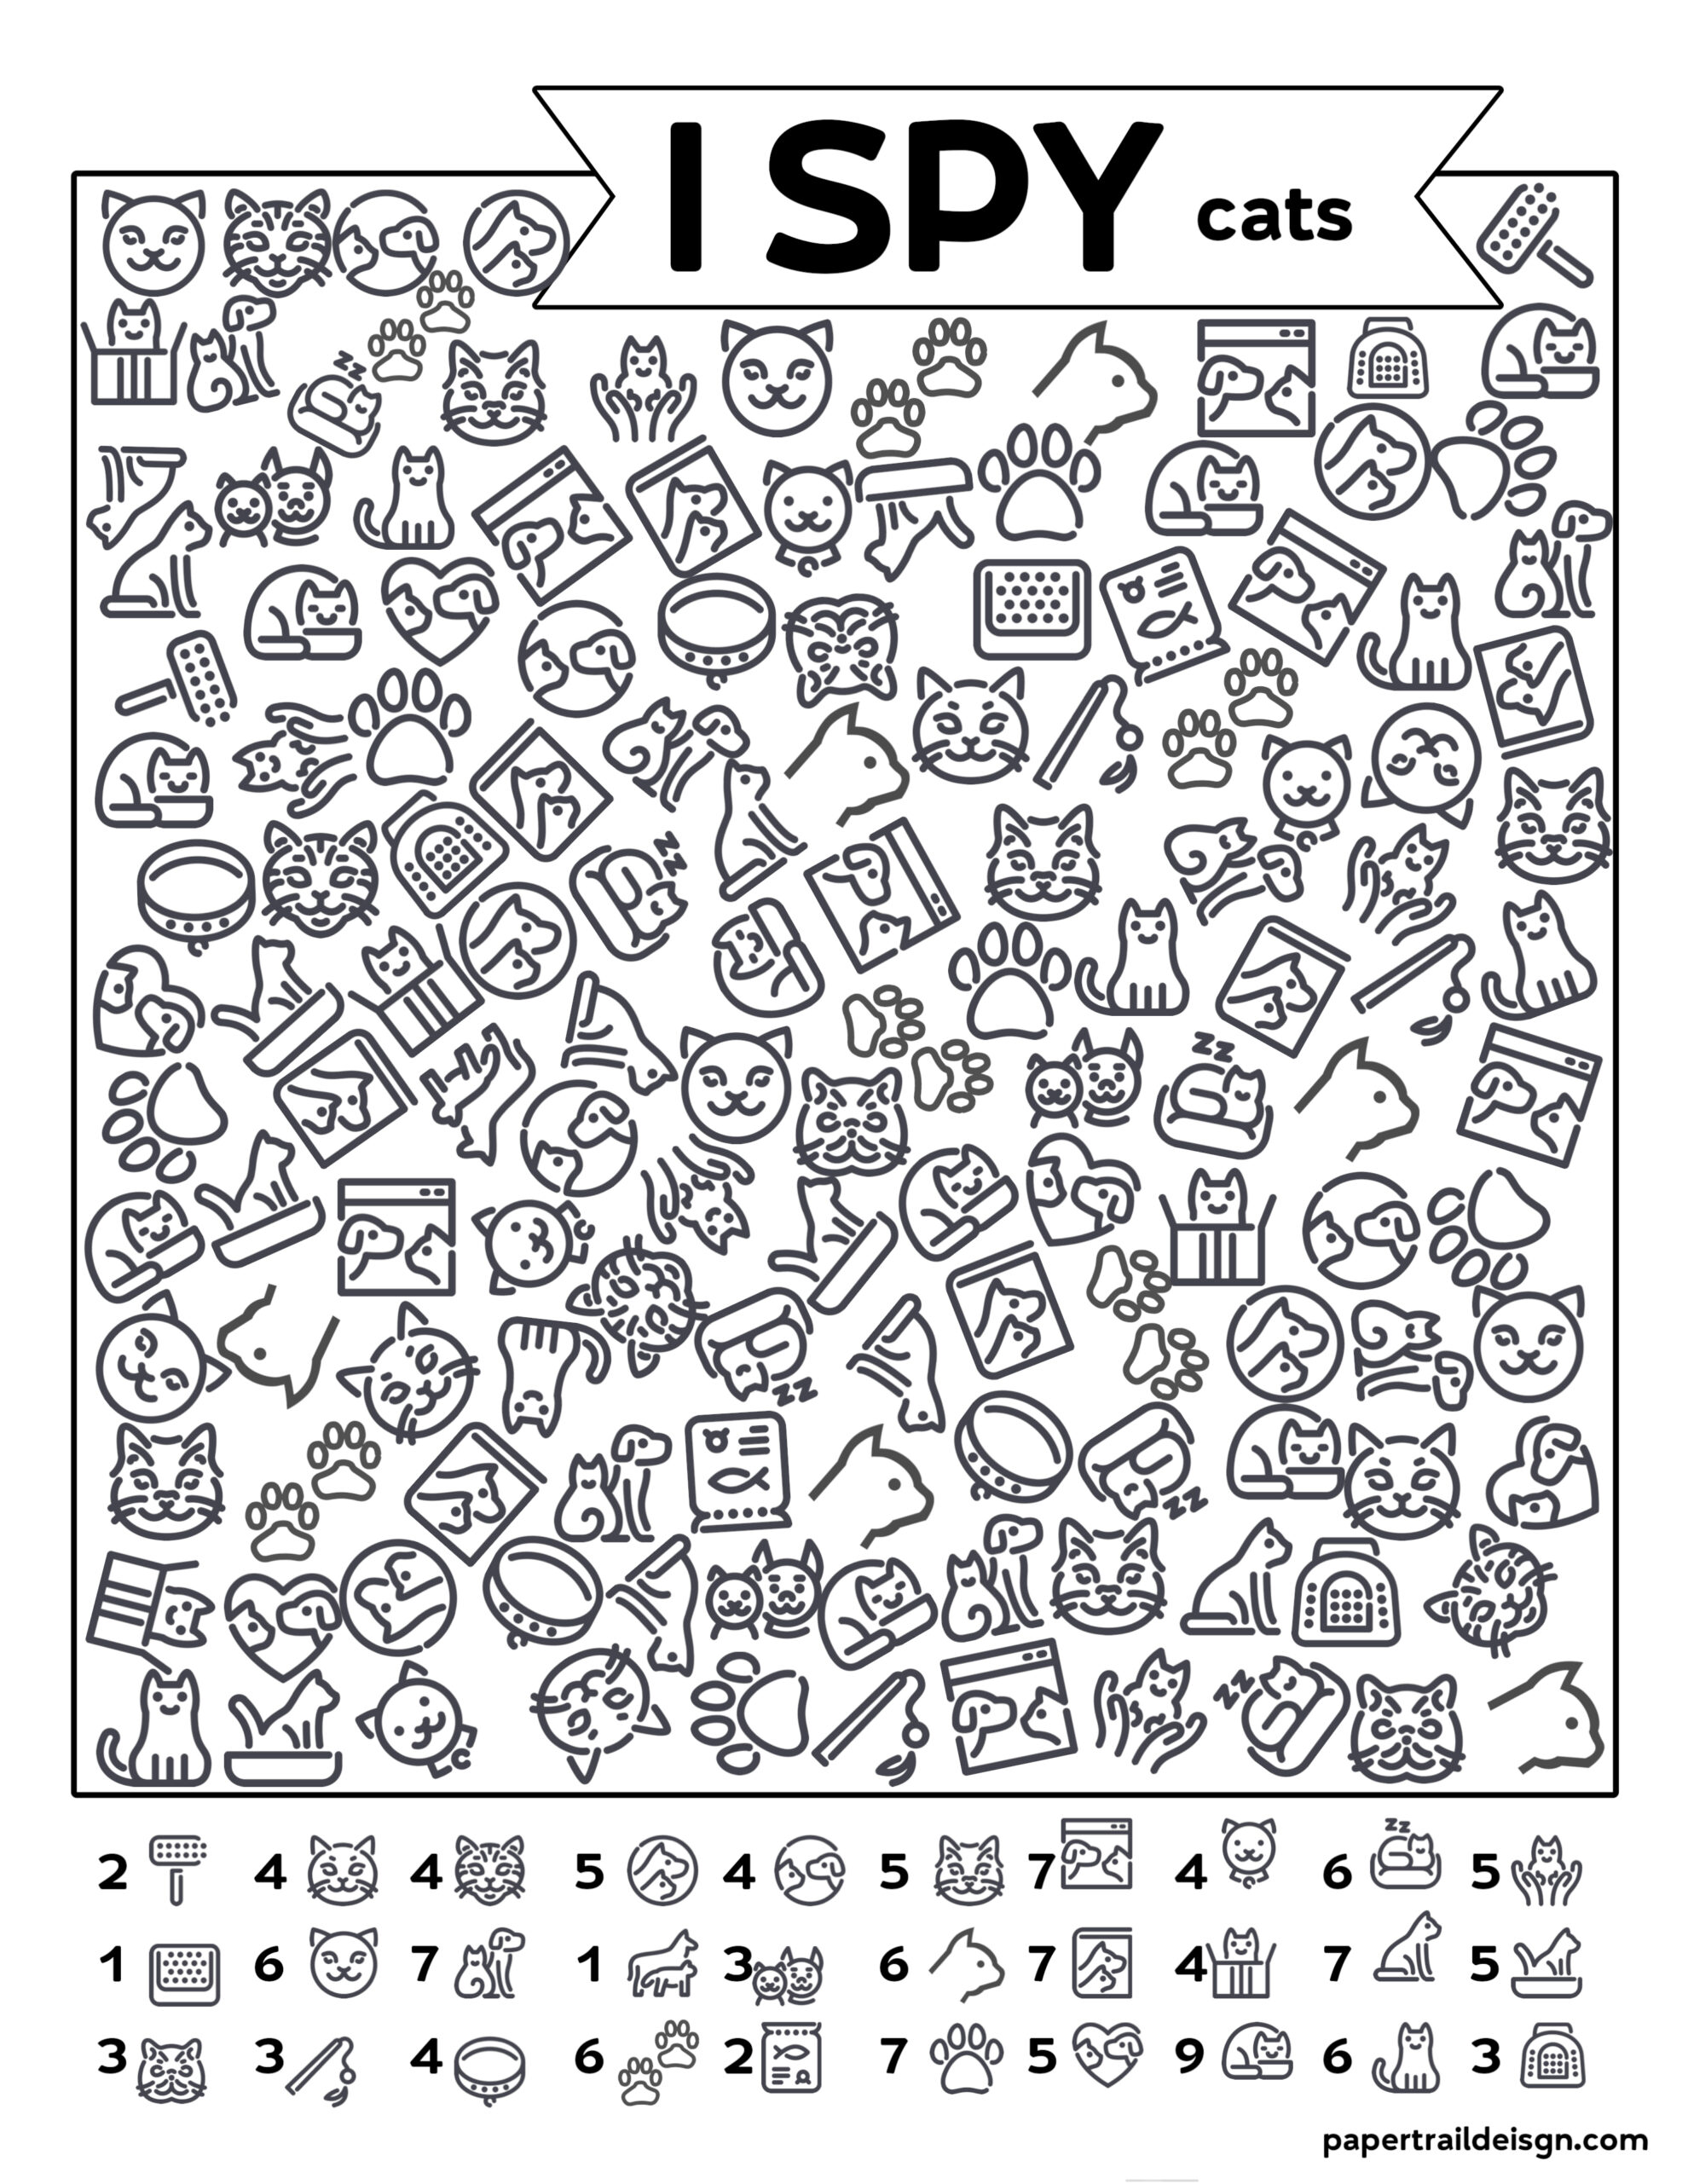 Free Printable I Spy Cats Activity Paper Trail Design